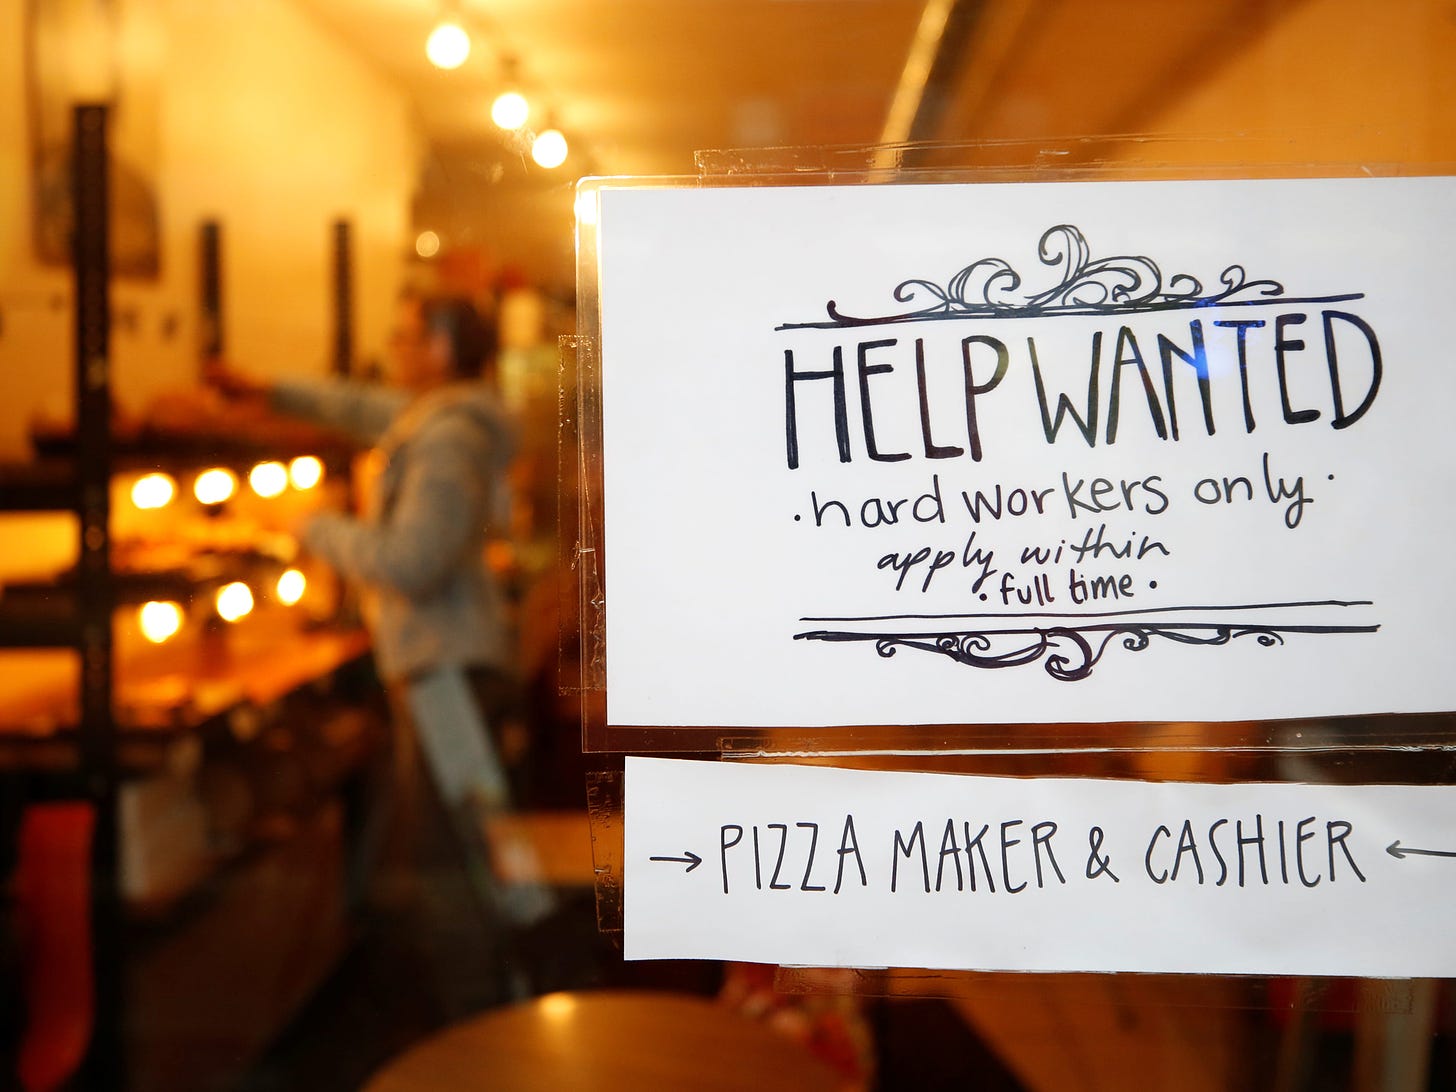 Report: Almost Half of Small Businesses Are Struggling to Hire Workers